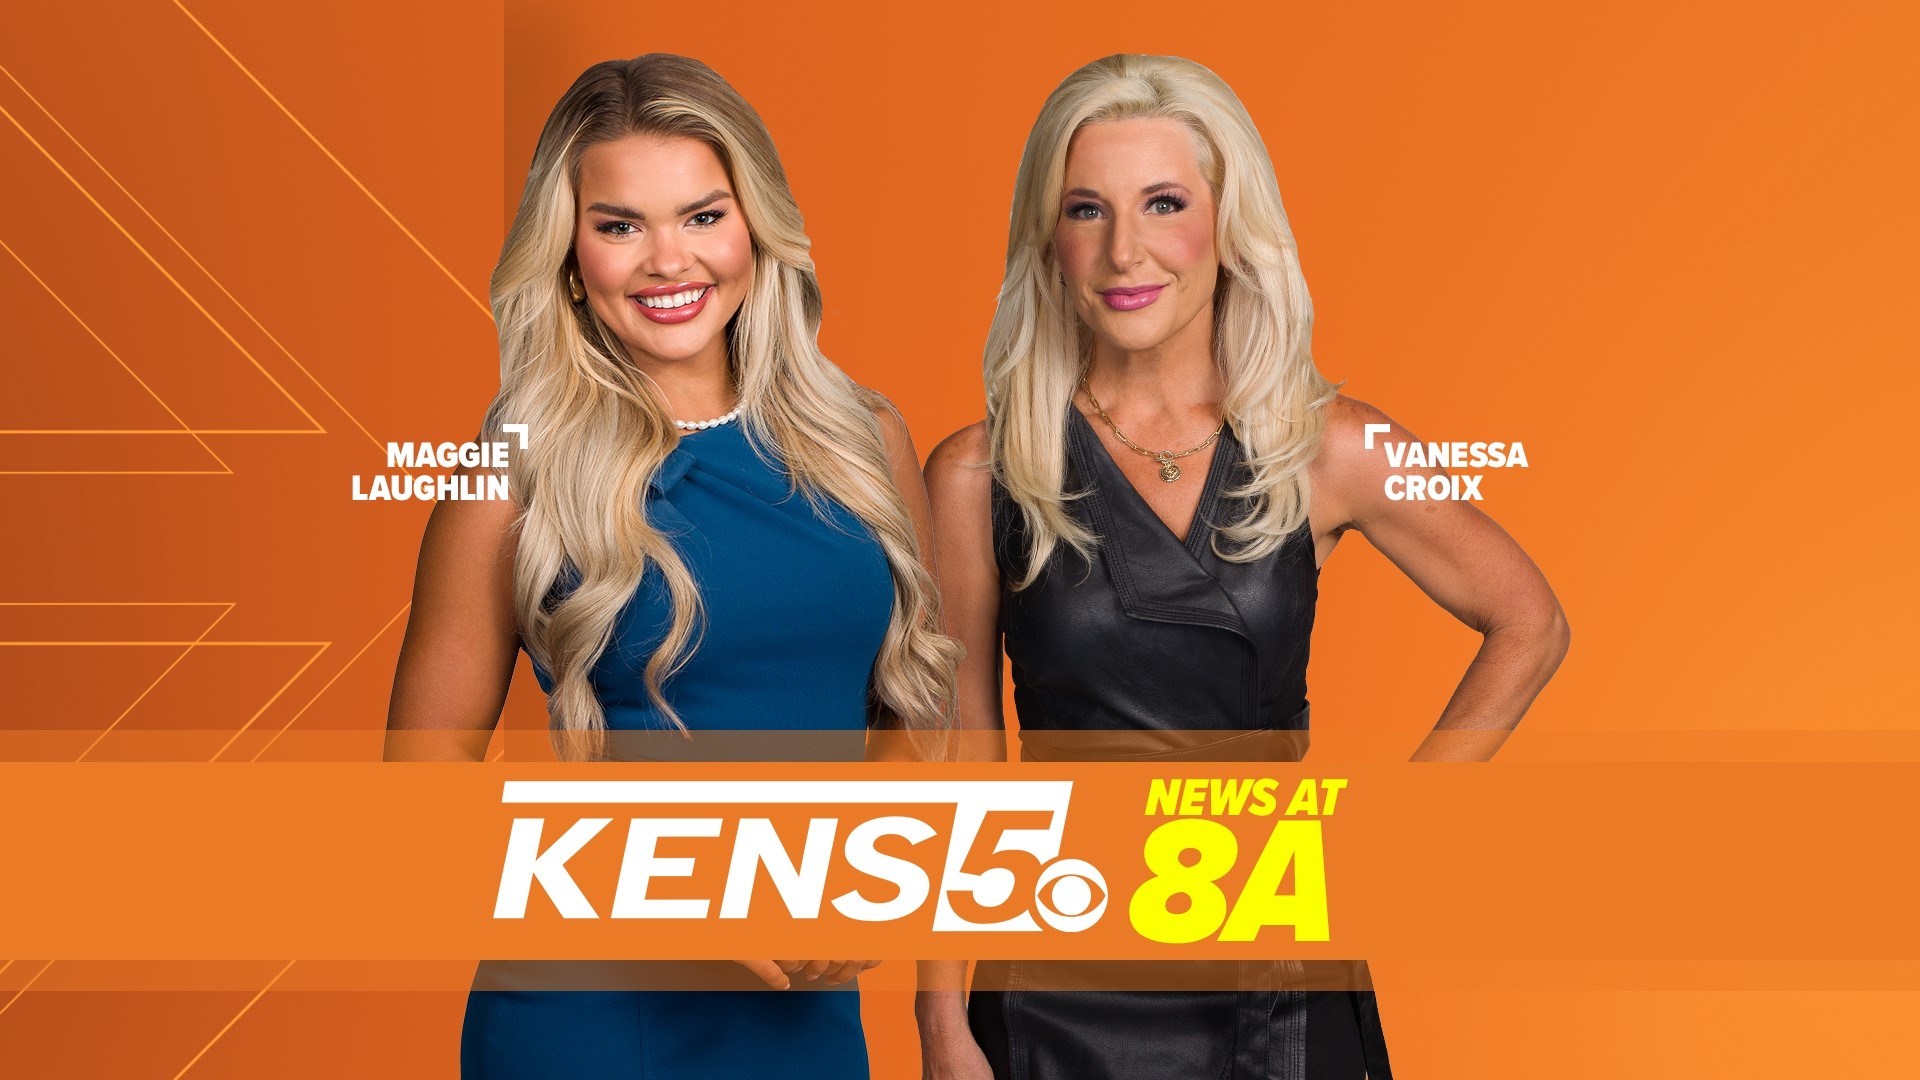 KENS 5 News brings you the latest San Antonio news reports, plus your local weather forecast, sports and traffic updates.